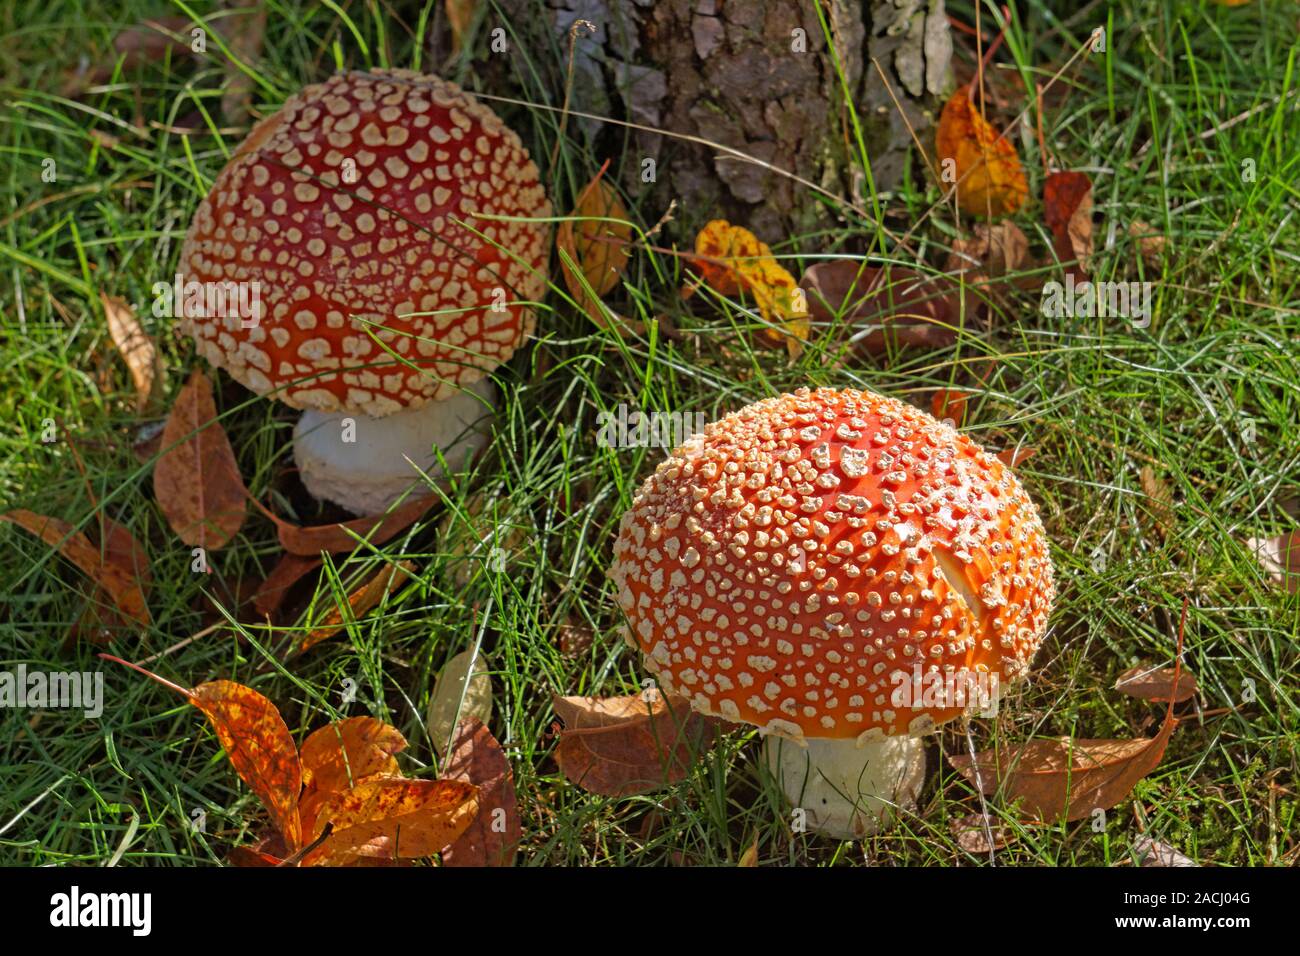 A pair of immature Amanita muscaria or Fly Amanita mushroom growing on the ground, Vancouver, British Columbia, Canada Stock Photo